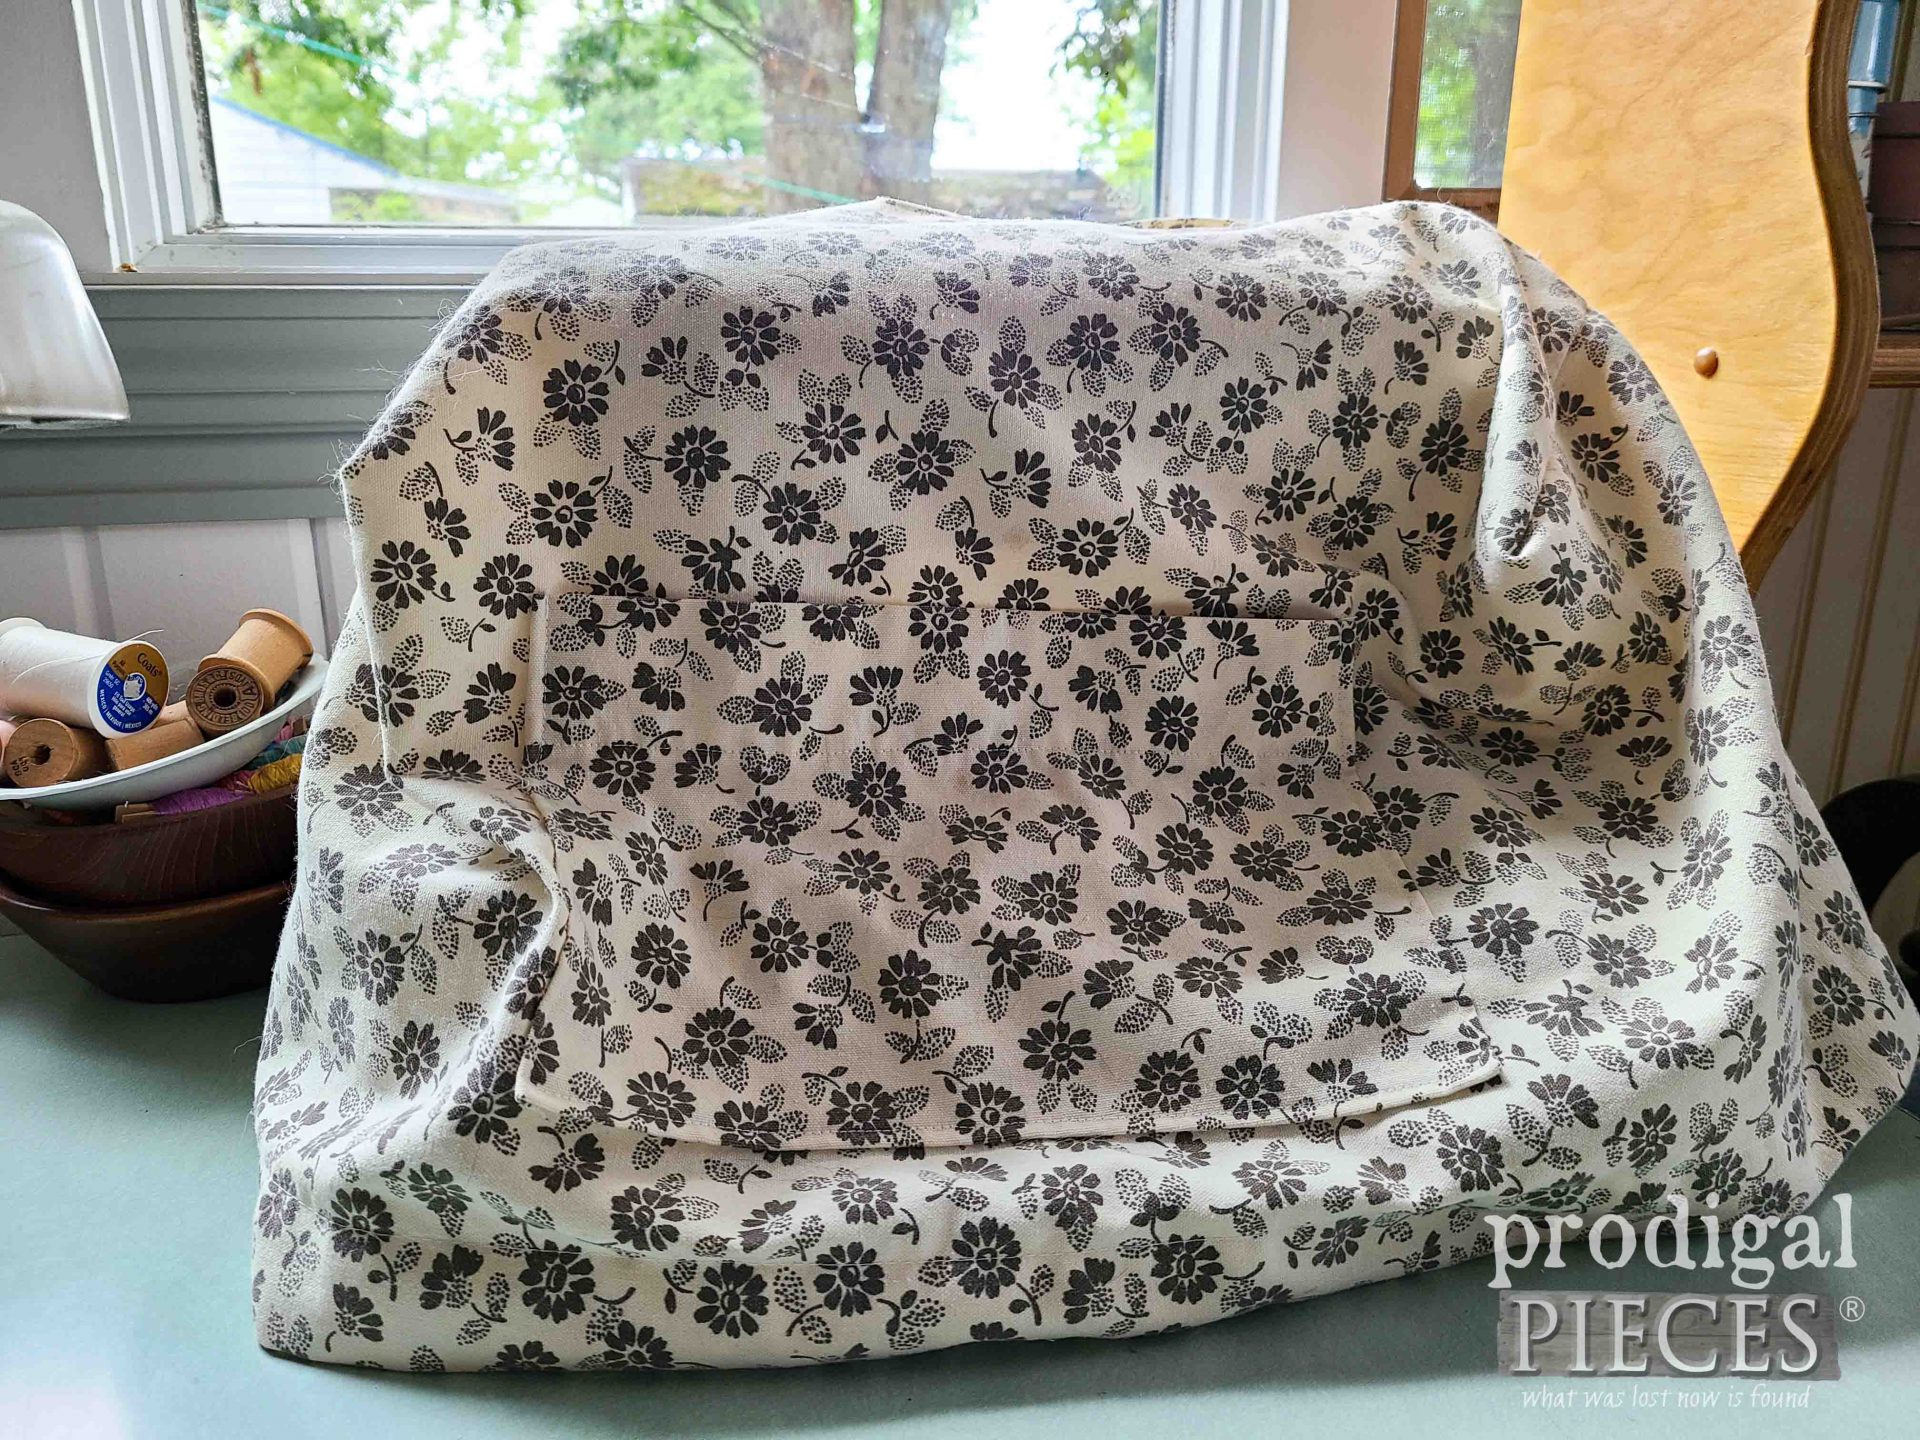 Refashioned Sewing Machine Cover from a Vintage Curtain | prodigalpieces.com #prodigalpieces